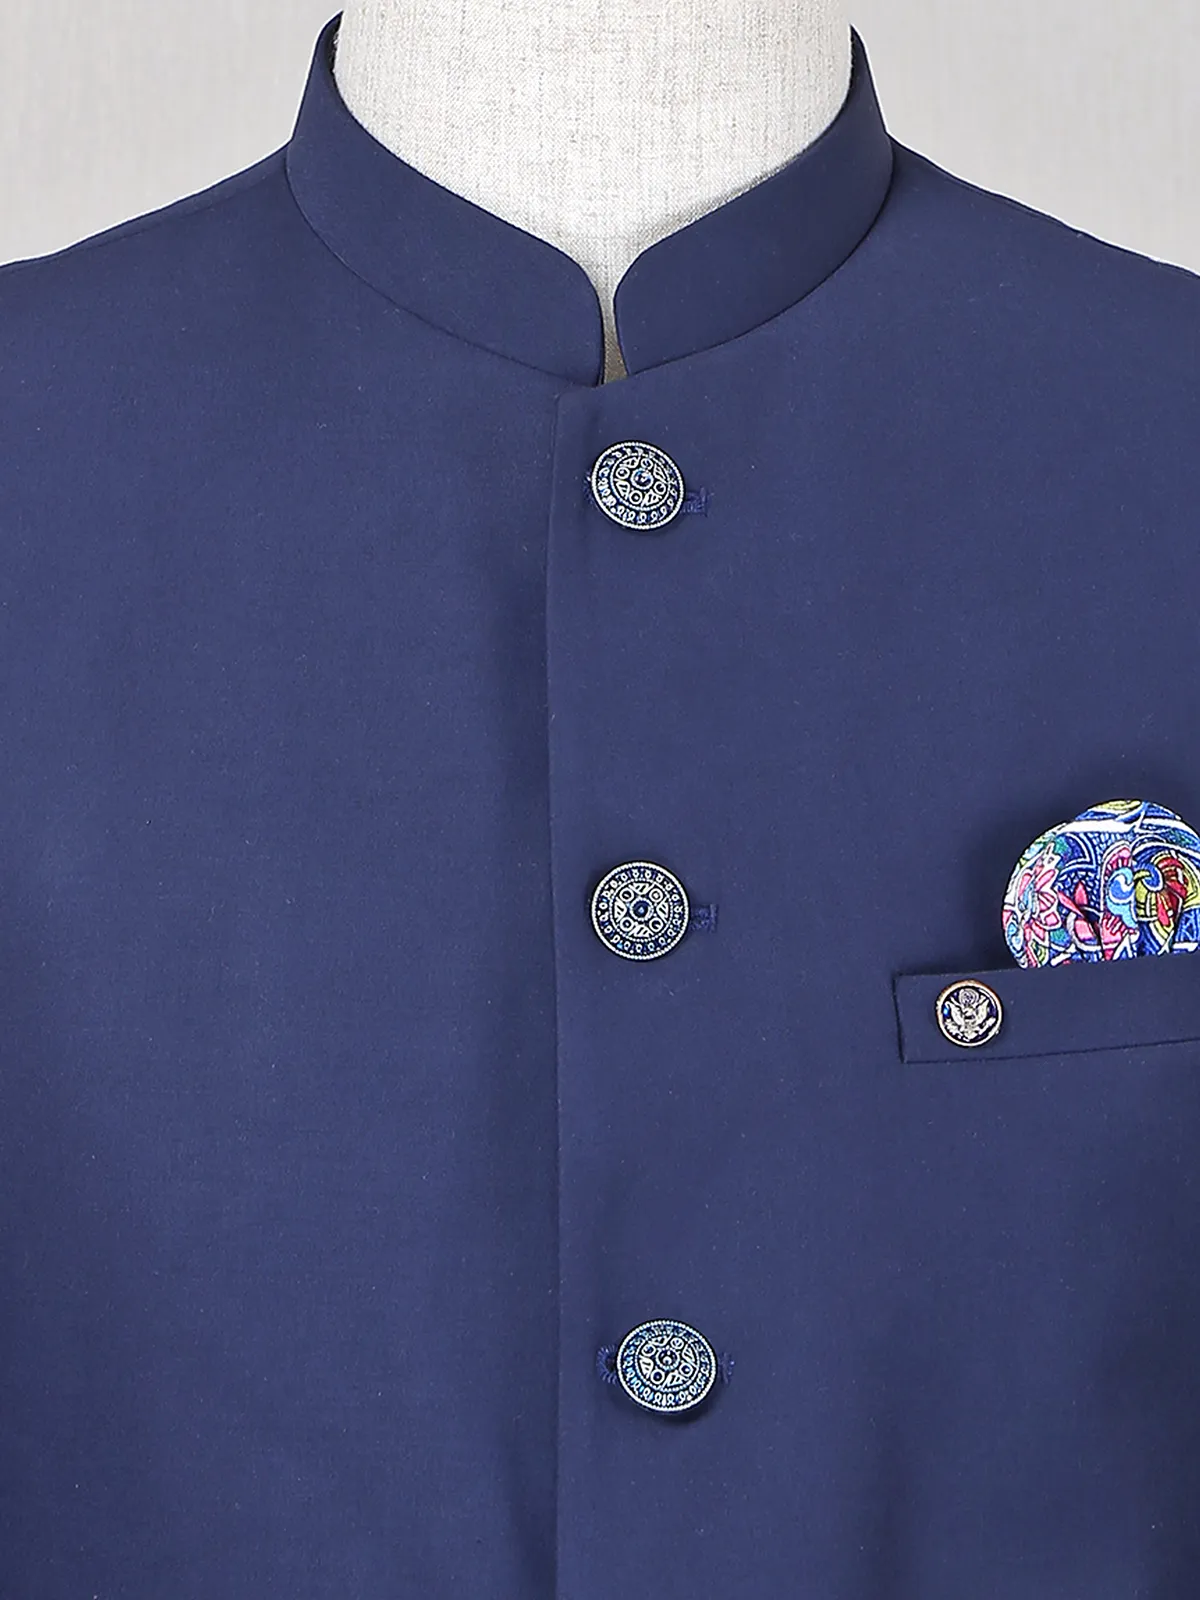 Navy color solid jodhpuri suit in terry rayon